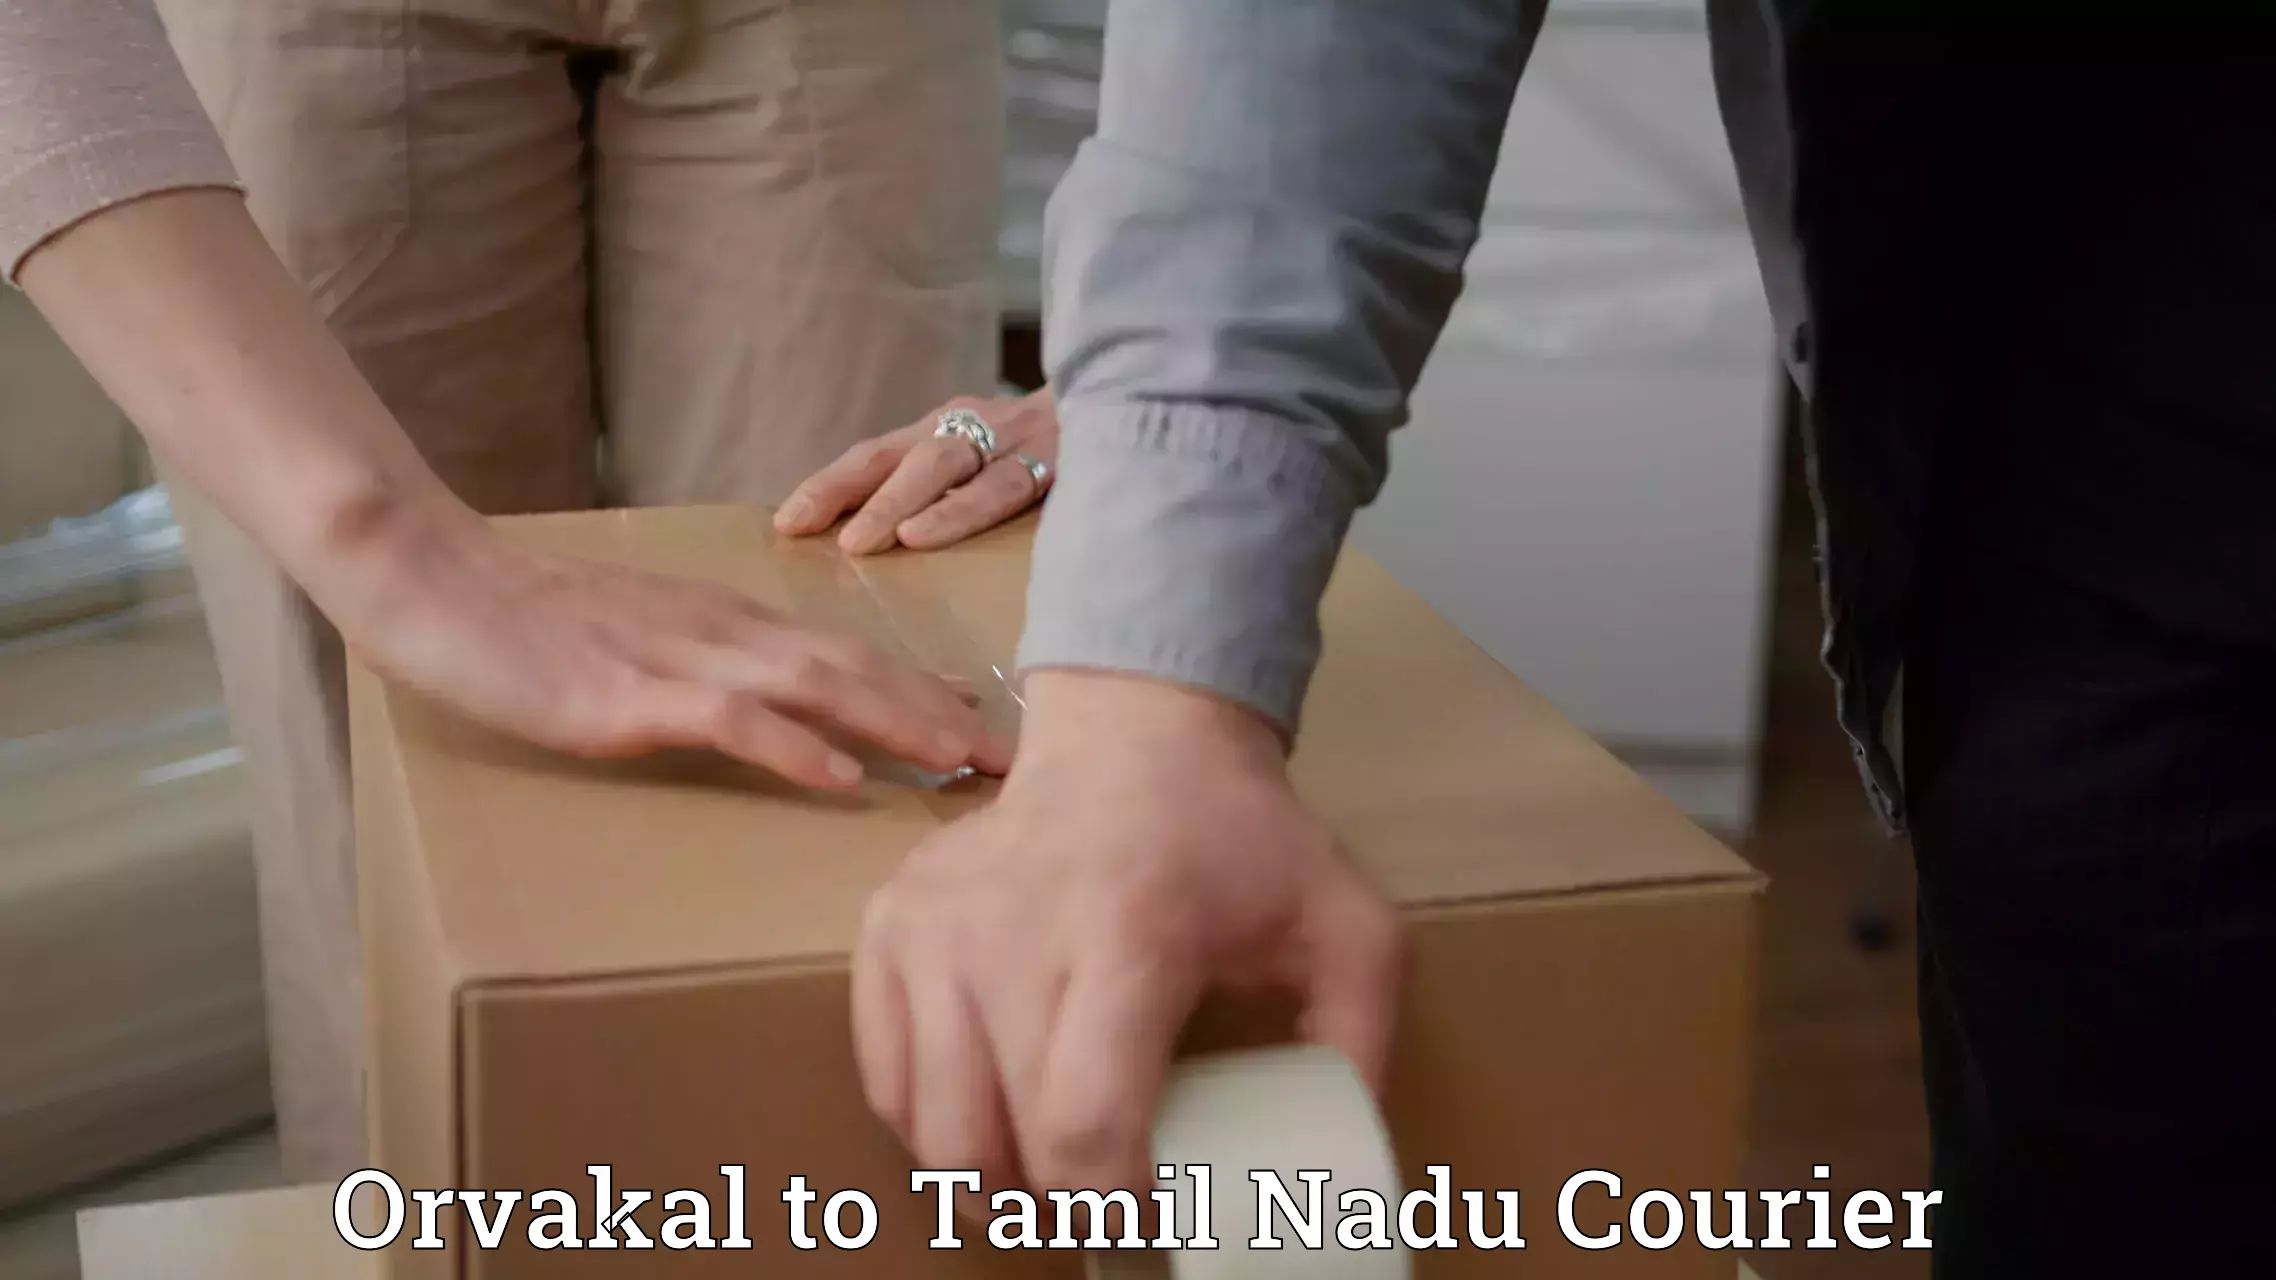 Easy access courier services in Orvakal to Madukkarai